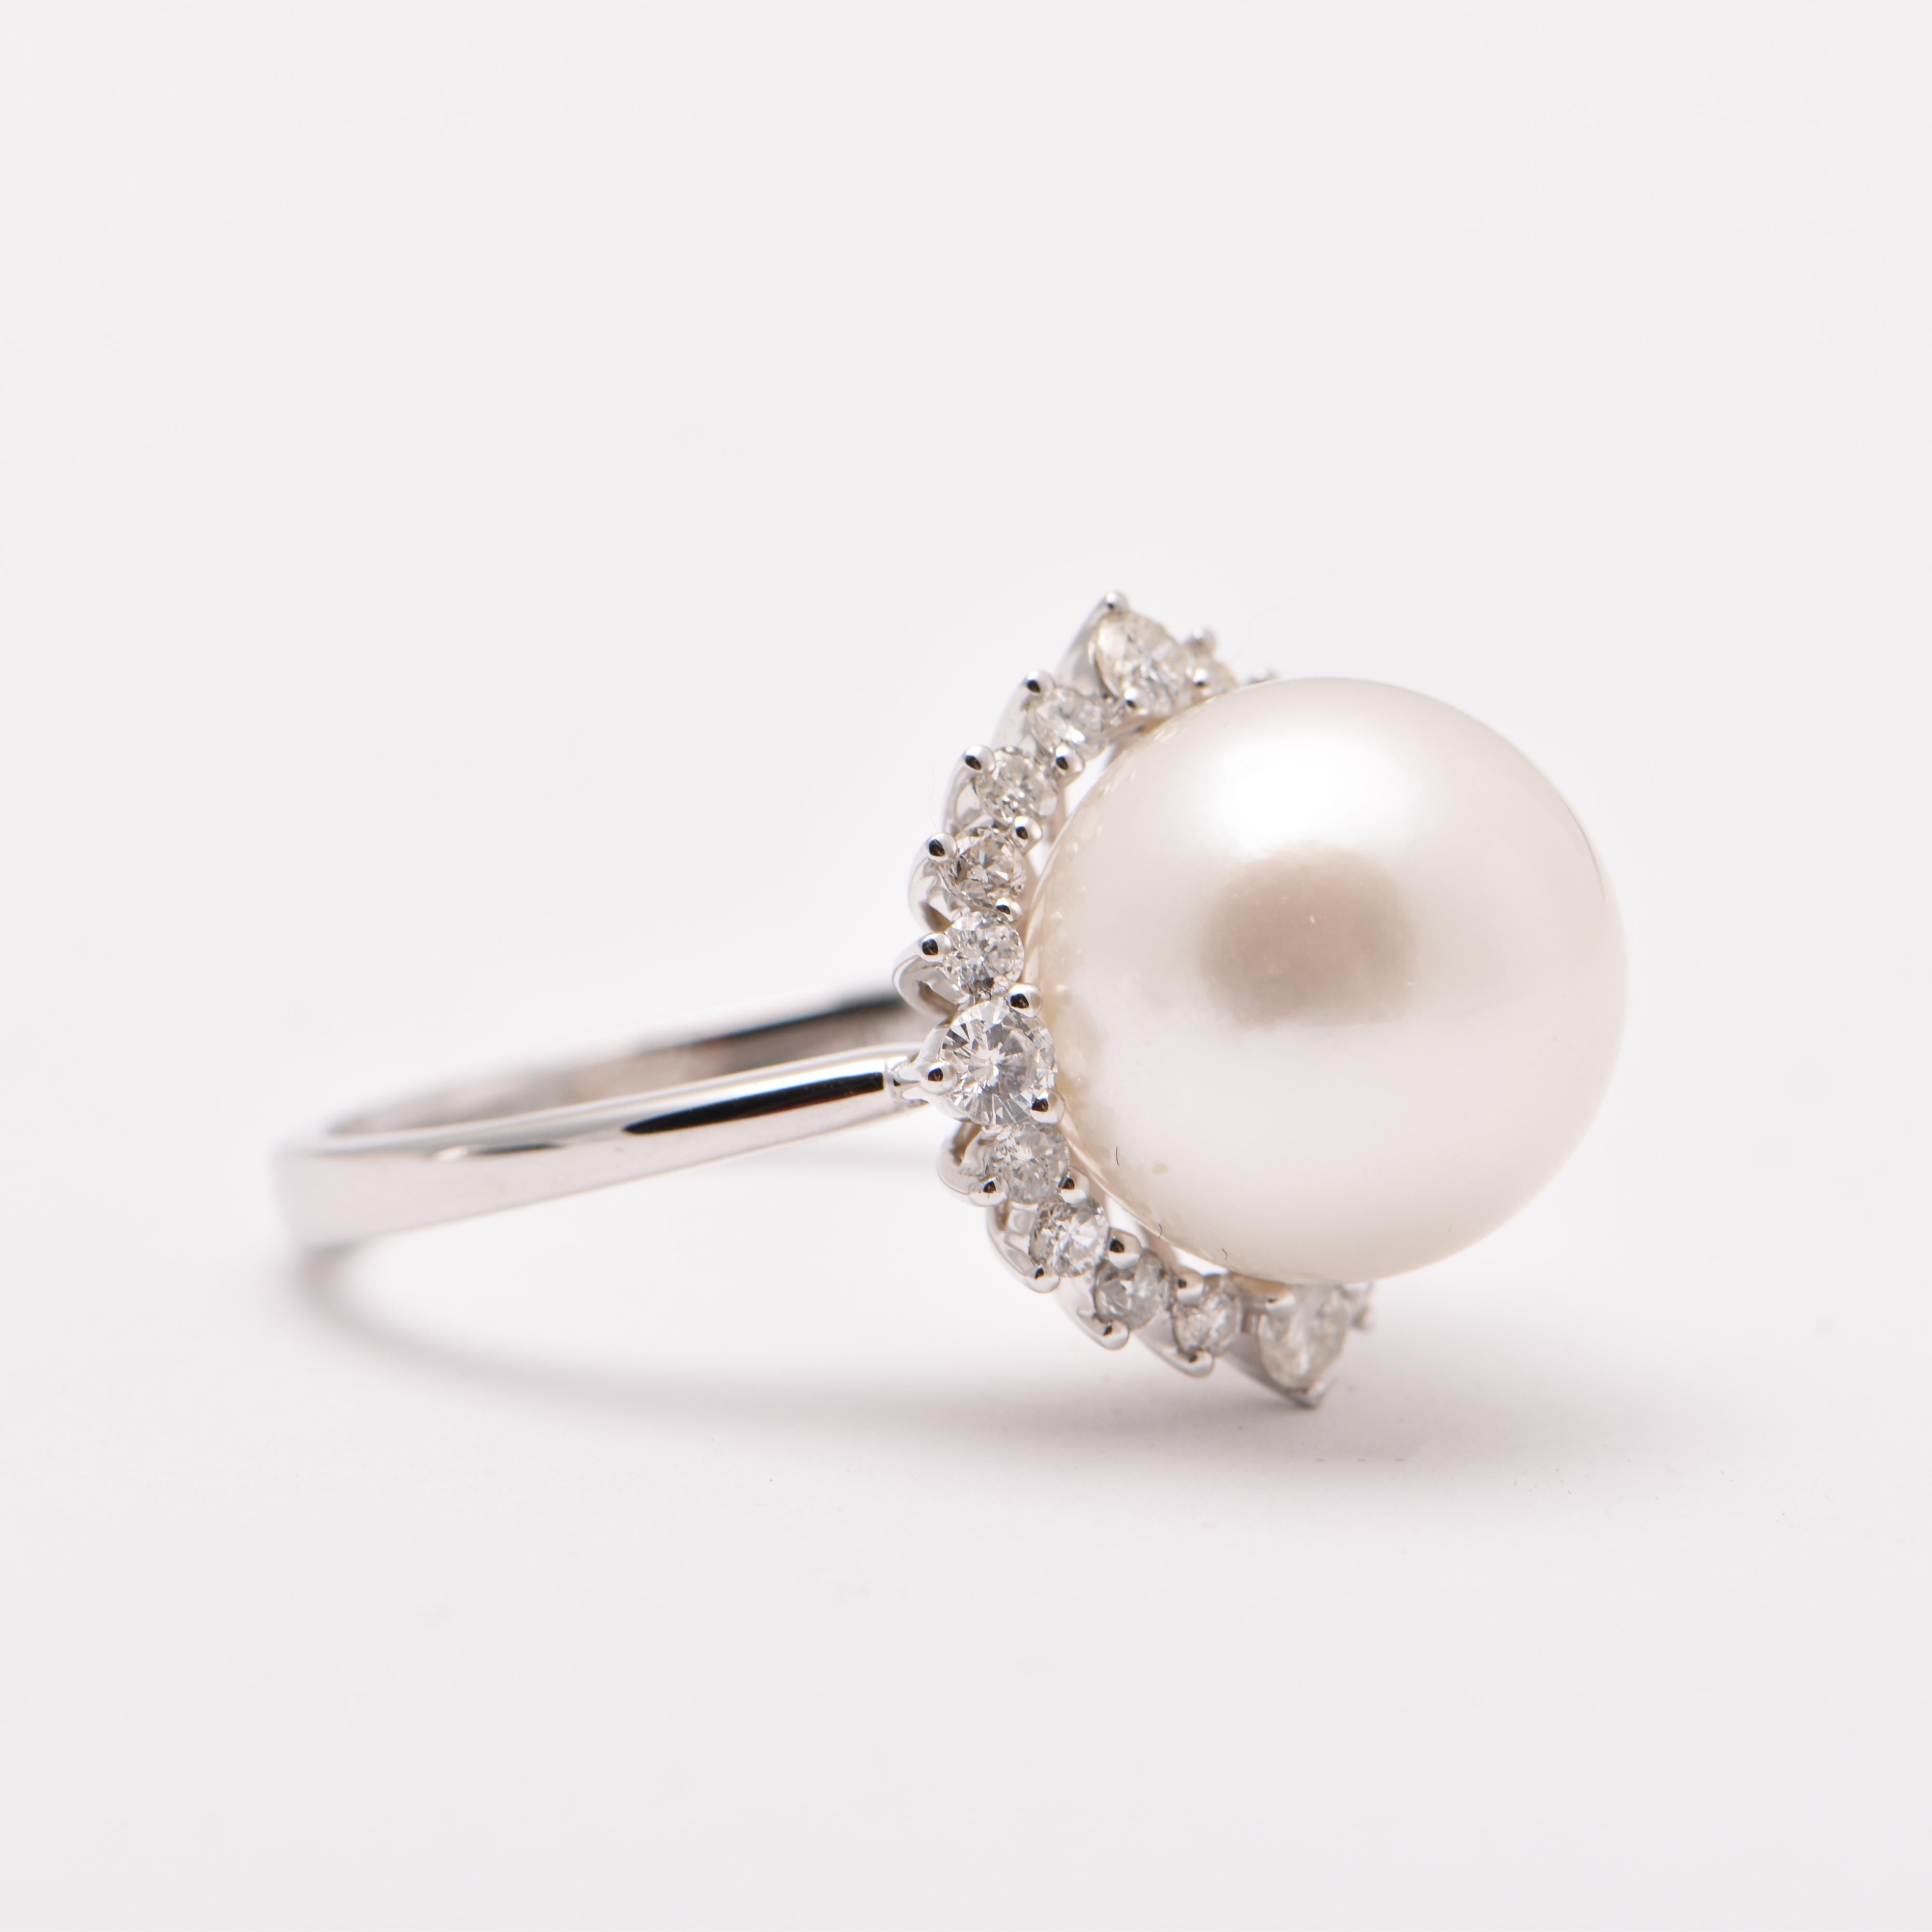 South Sea Pearl and Diamond Halo Cocktail Ring in 18 Carat White Gold by Cartmer Jewellery

Size M

1 South Sea Pearl
20 Diamonds totalling 0.51 carats
18 Carat White Gold Ring

FREE express postage usually 3-4 days Sydney to New York
FREE